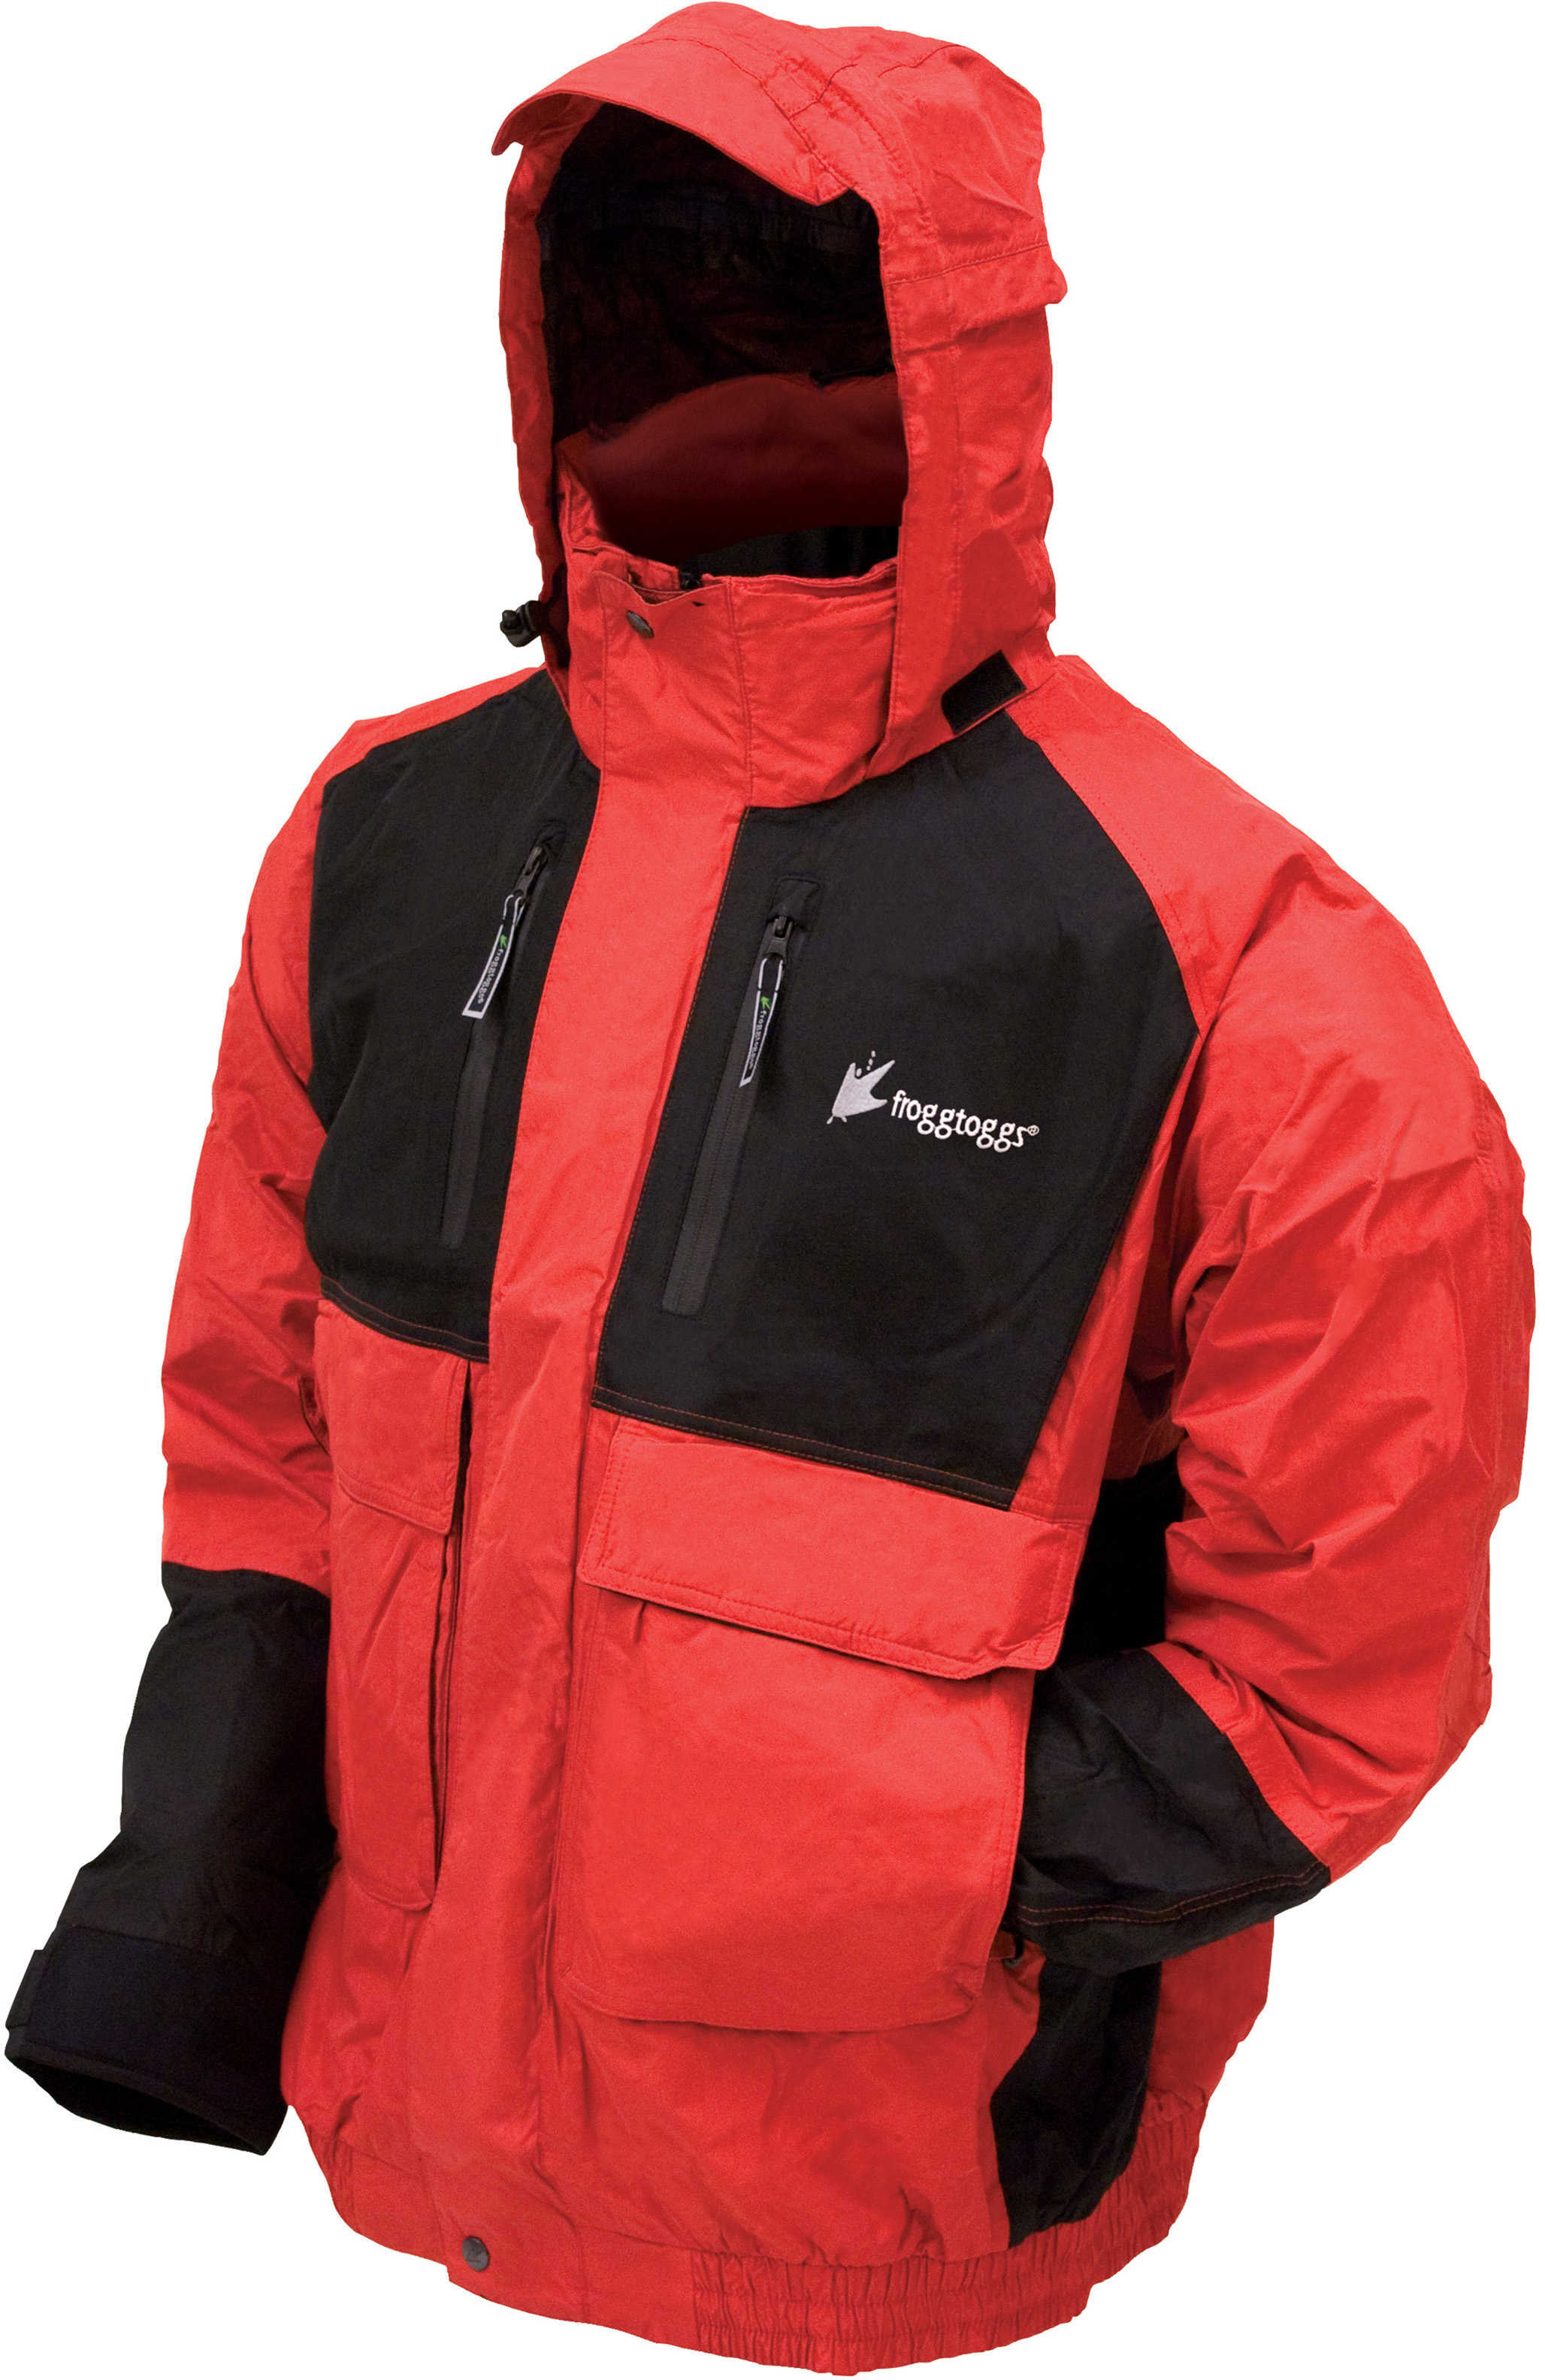 Frogg Toggs Firebelly Toadz Jacket Black/Red Medium NT6201-110MD